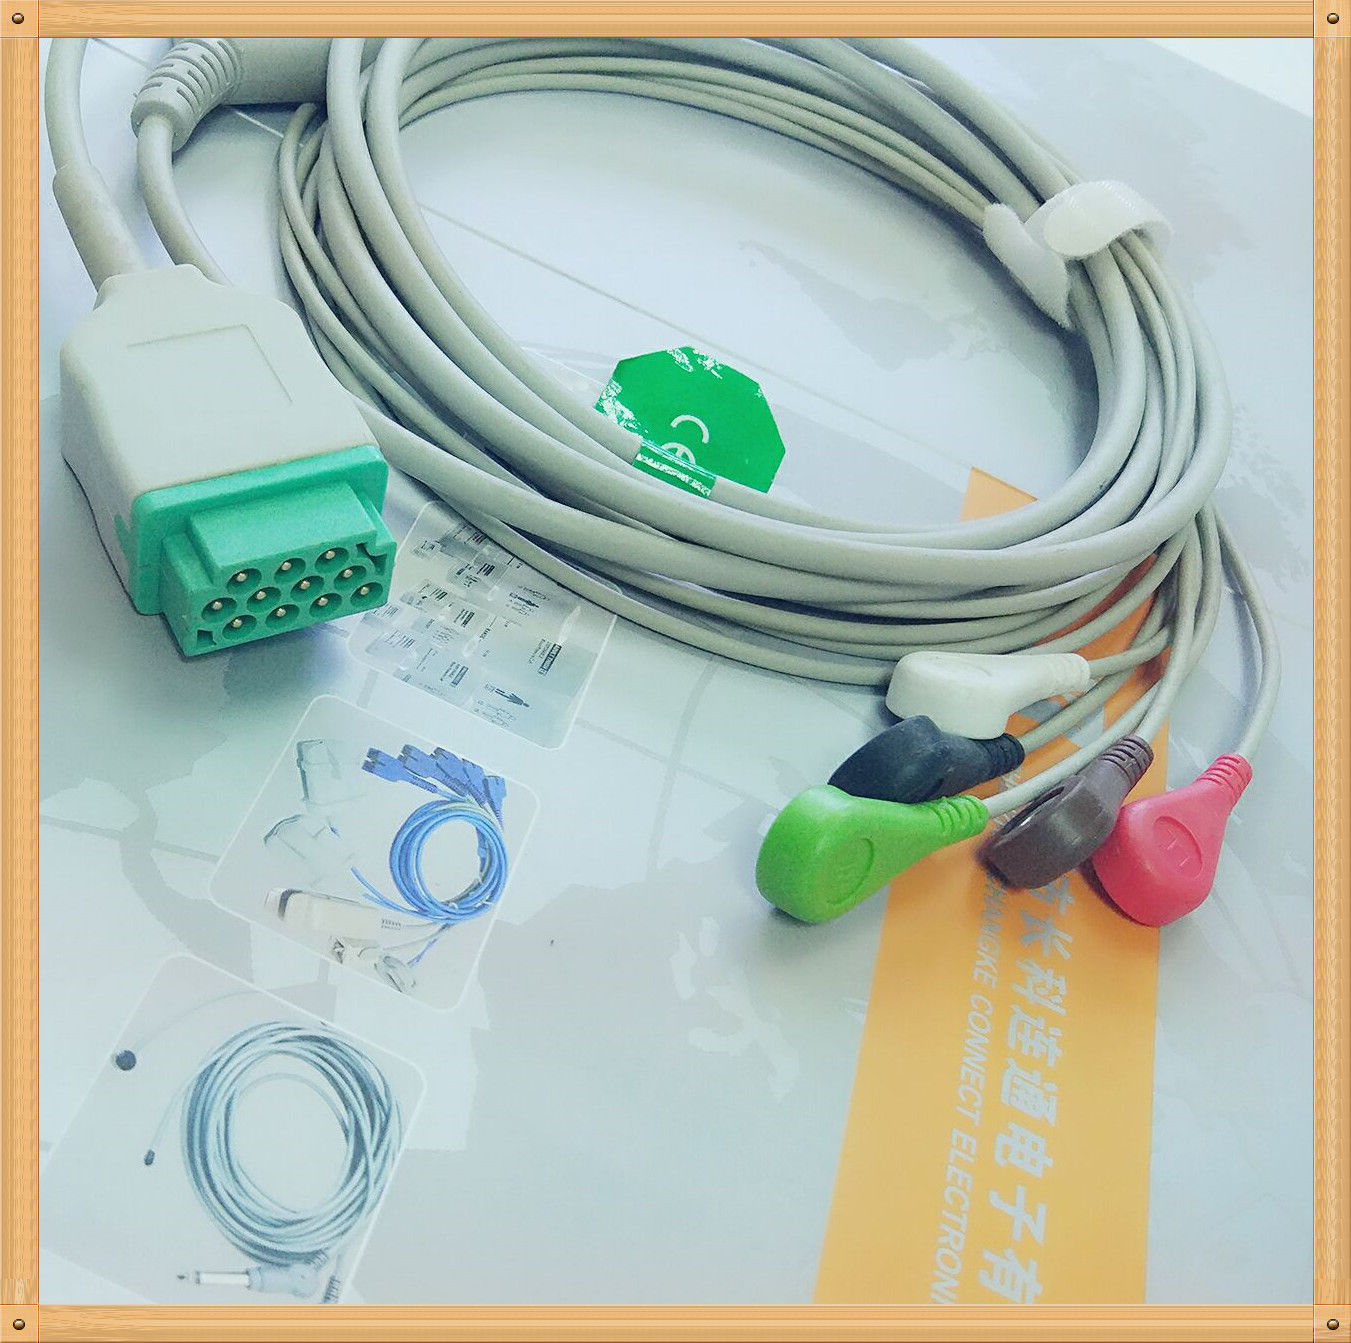 GE Marquette 11 Pin One Piece ECG Cable 5 Leads Snap AHA DIAGNOSTIC ULTRASOUND MACHINES FOR SALE